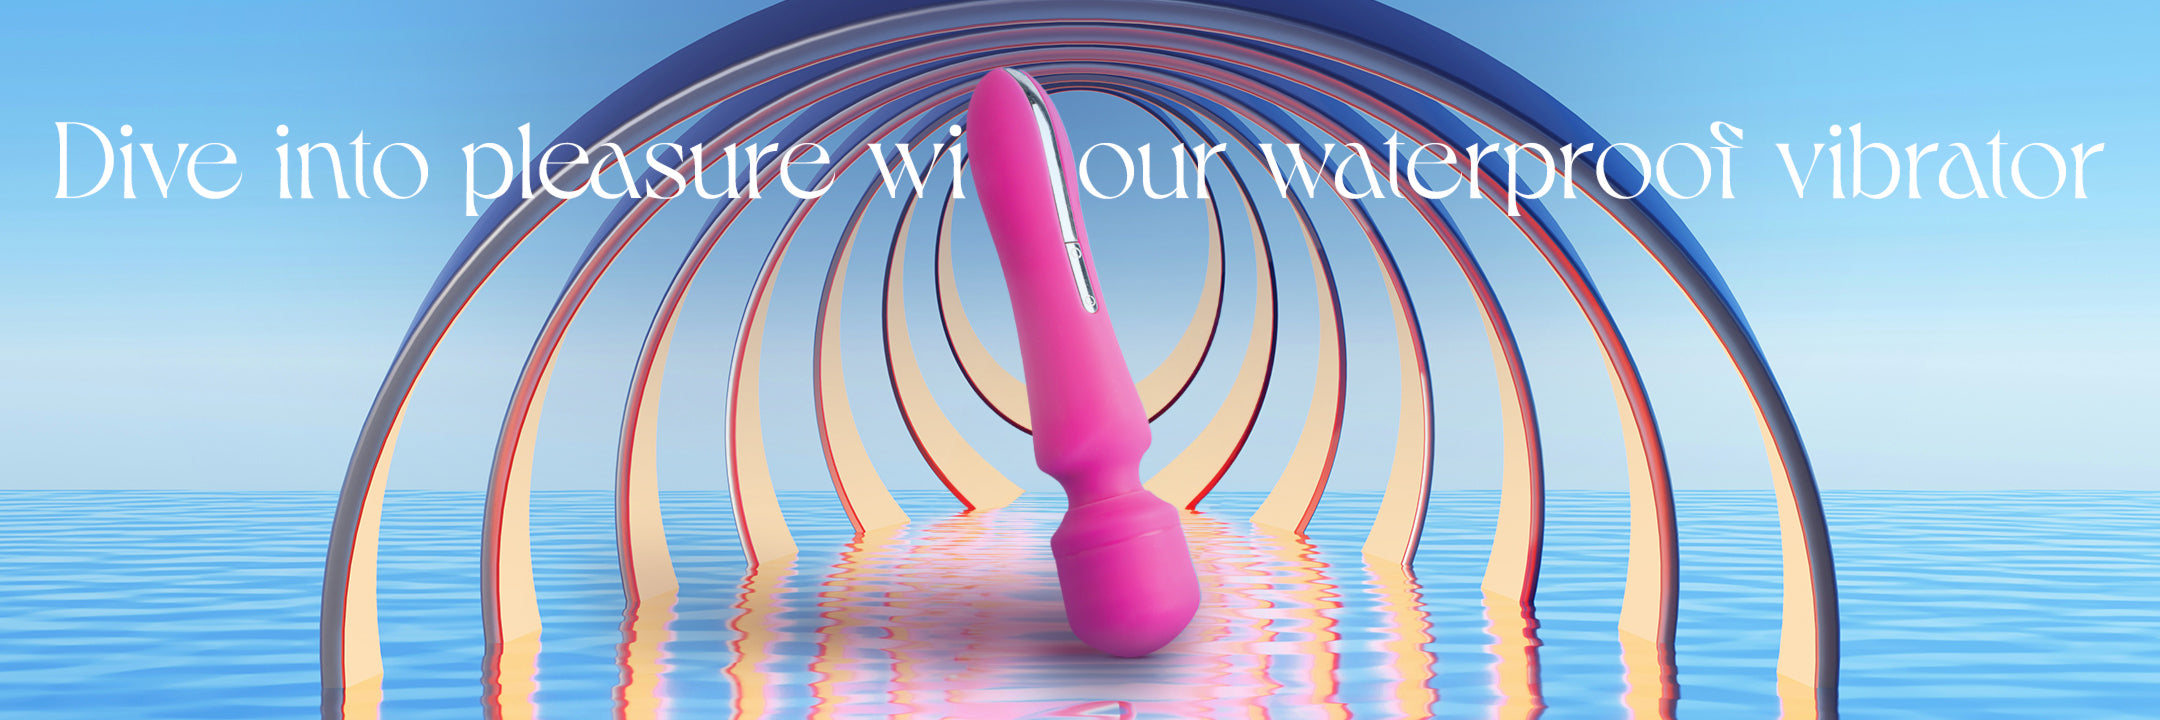 Dive into pleasure with our waterproof vibrator